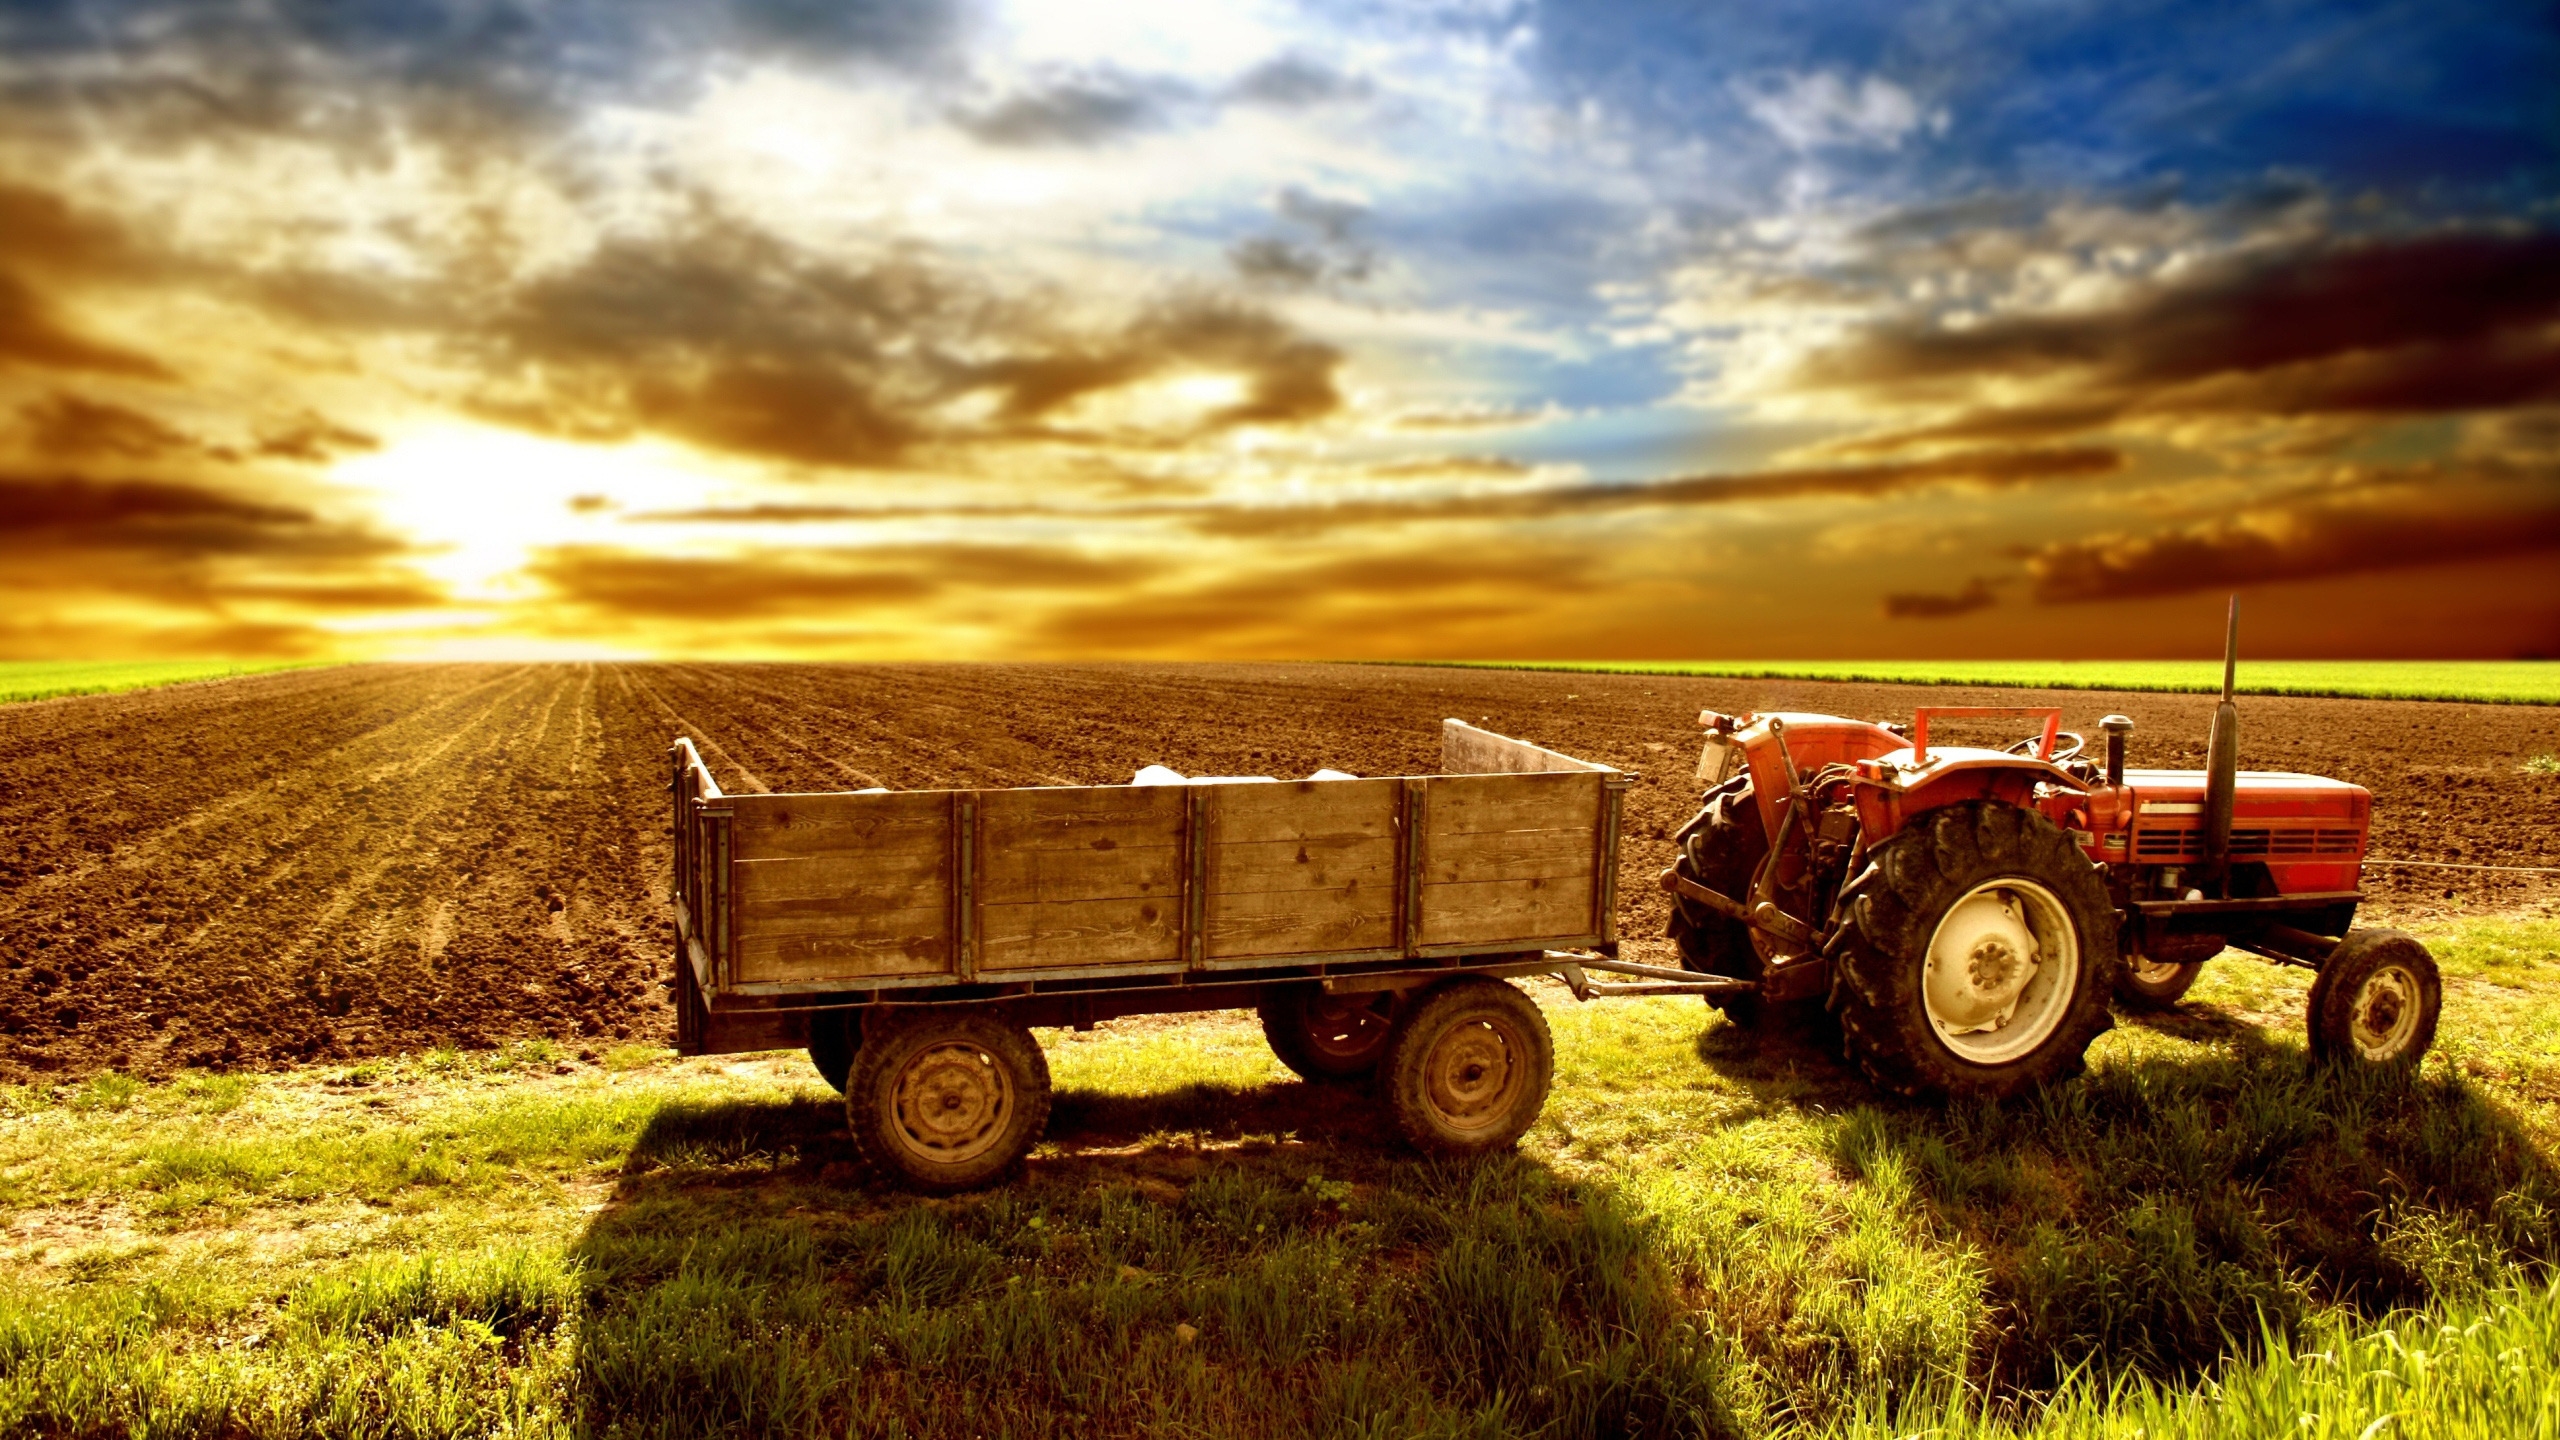 HDR Tractor for 2560x1440 HDTV resolution